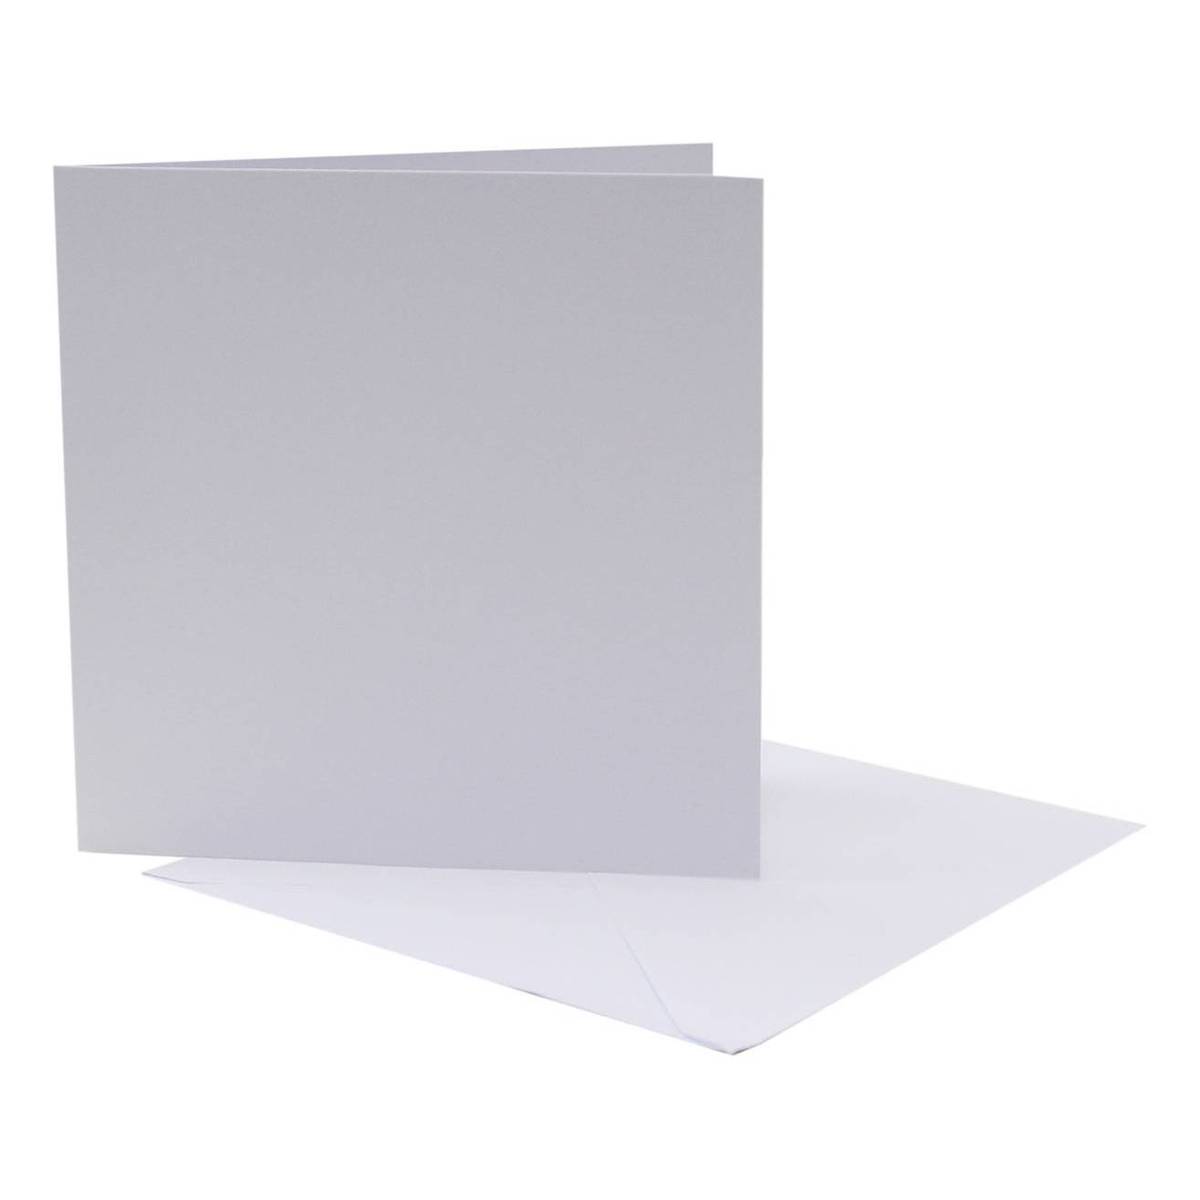 White Hammered Cards and Envelopes 6 x 6 Inches 20 Pack | Hobbycraft